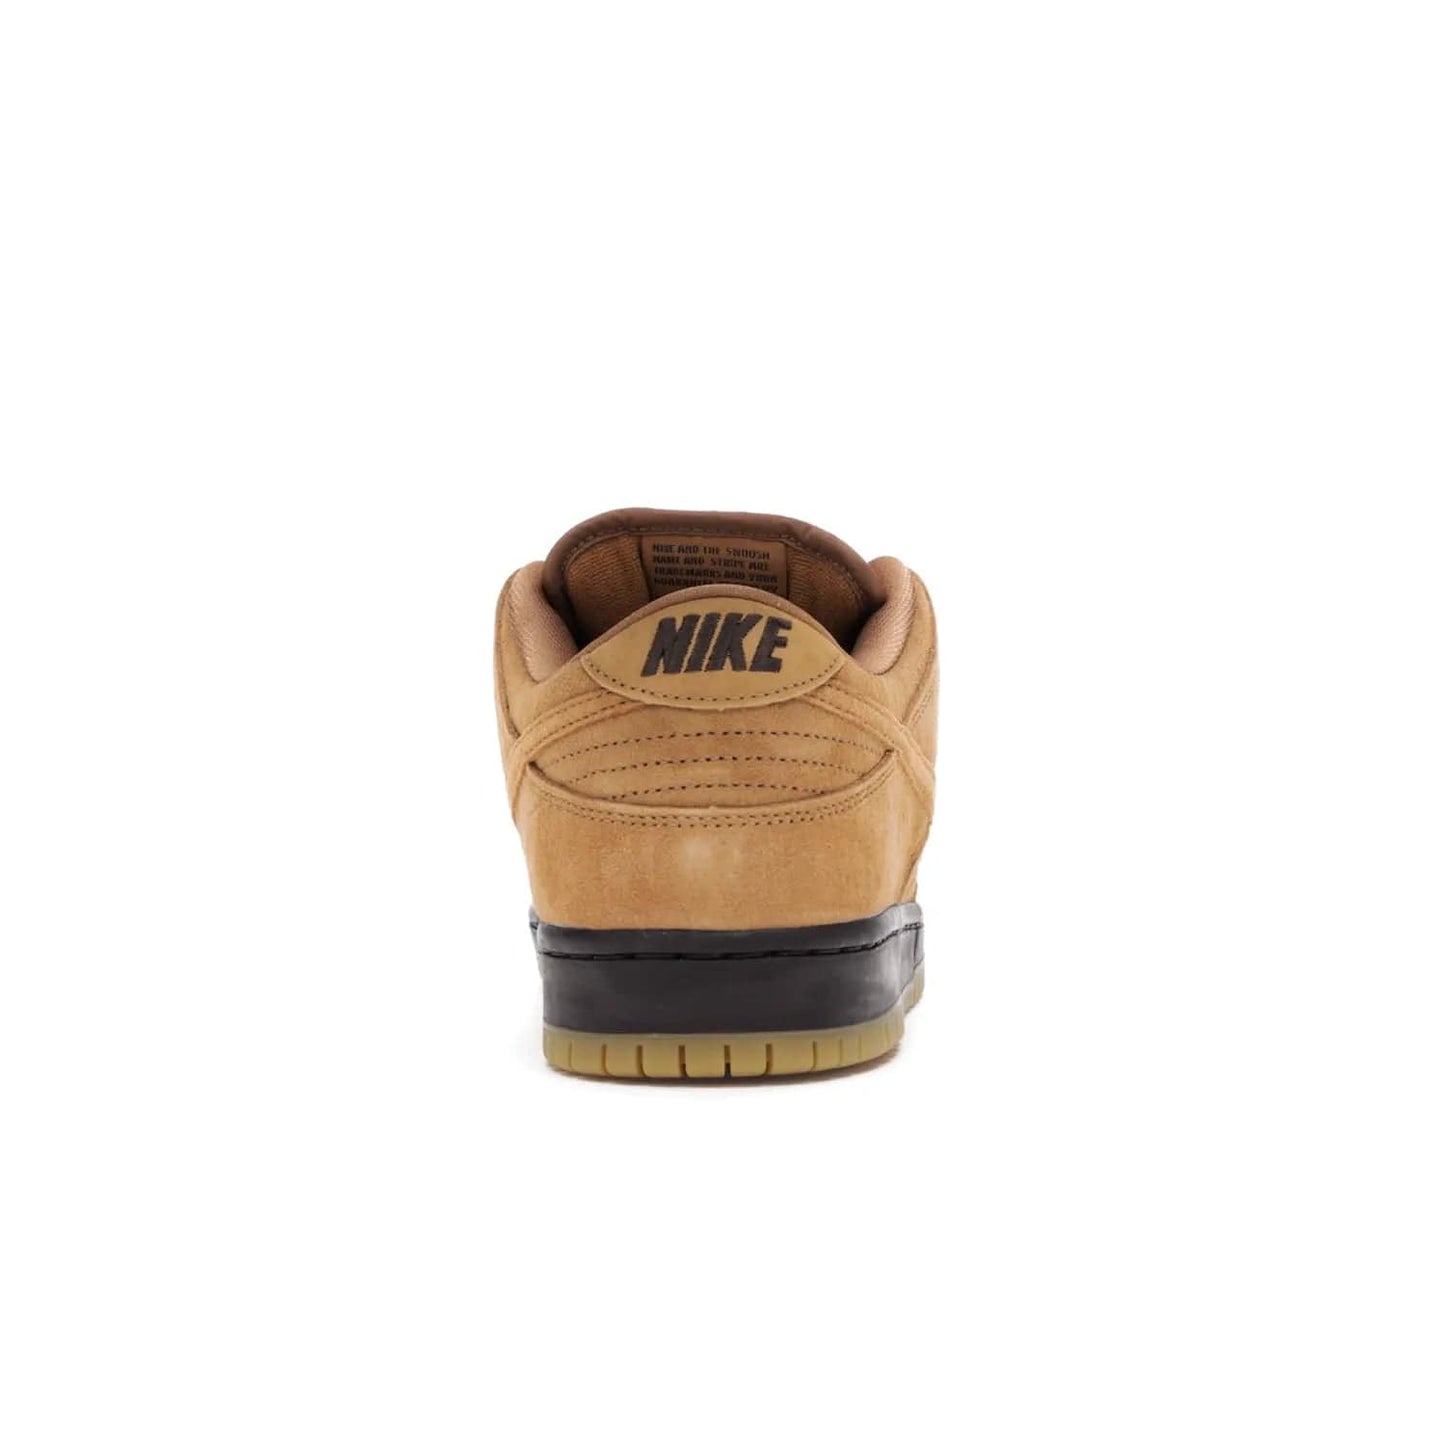 Nike SB Dunk Low Wheat (2021/2023) - Image 28 - Only at www.BallersClubKickz.com - The Nike SB Dunk Low Wheat (2021/2023)has a sleek silhouette and wheat suede upper. Tan tones for lining, mesh tongues, and laces. Iconic color palette midsole, perforated boxing toe. Brown branding on tongue and heel. Gum rubber outsole with partitioned pattern for traction. Eschewed in Feb 2021 for $110.